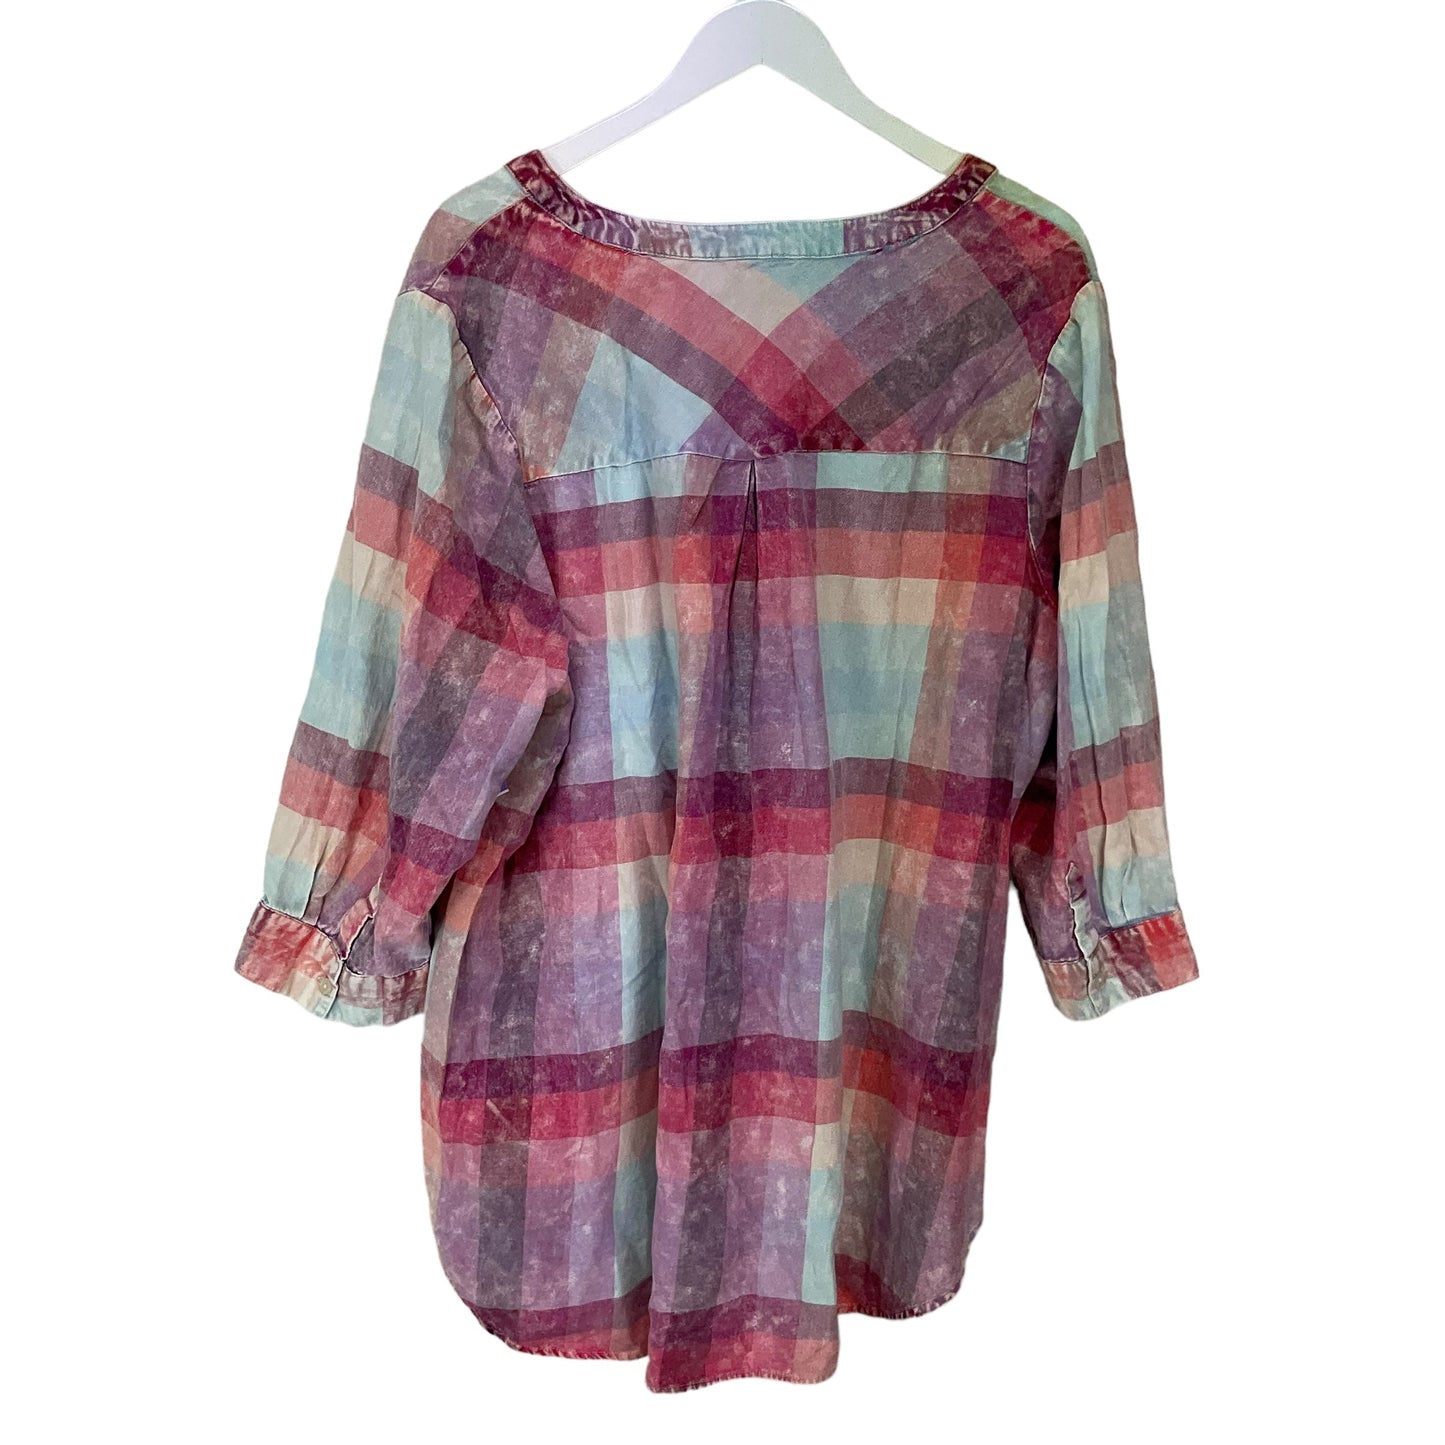 Plaid Pattern Top Long Sleeve Intro, Size 3x